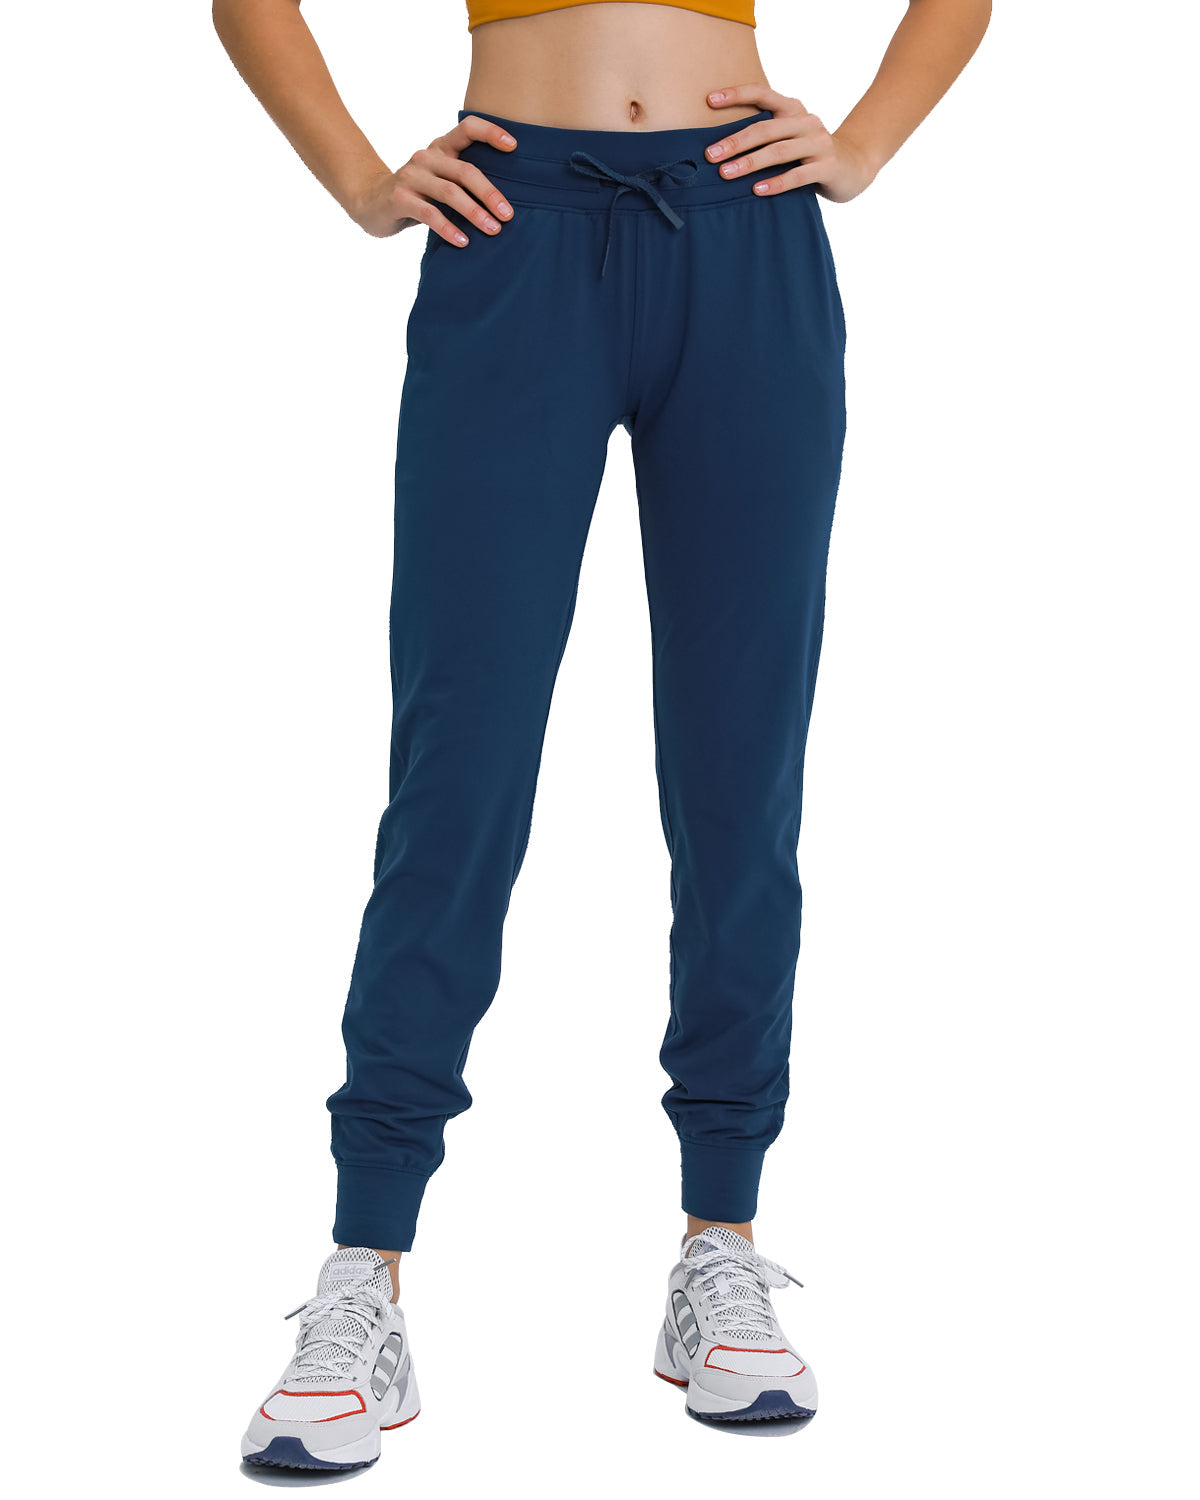 Willit Women's Stretch High-Rise Running Joggers